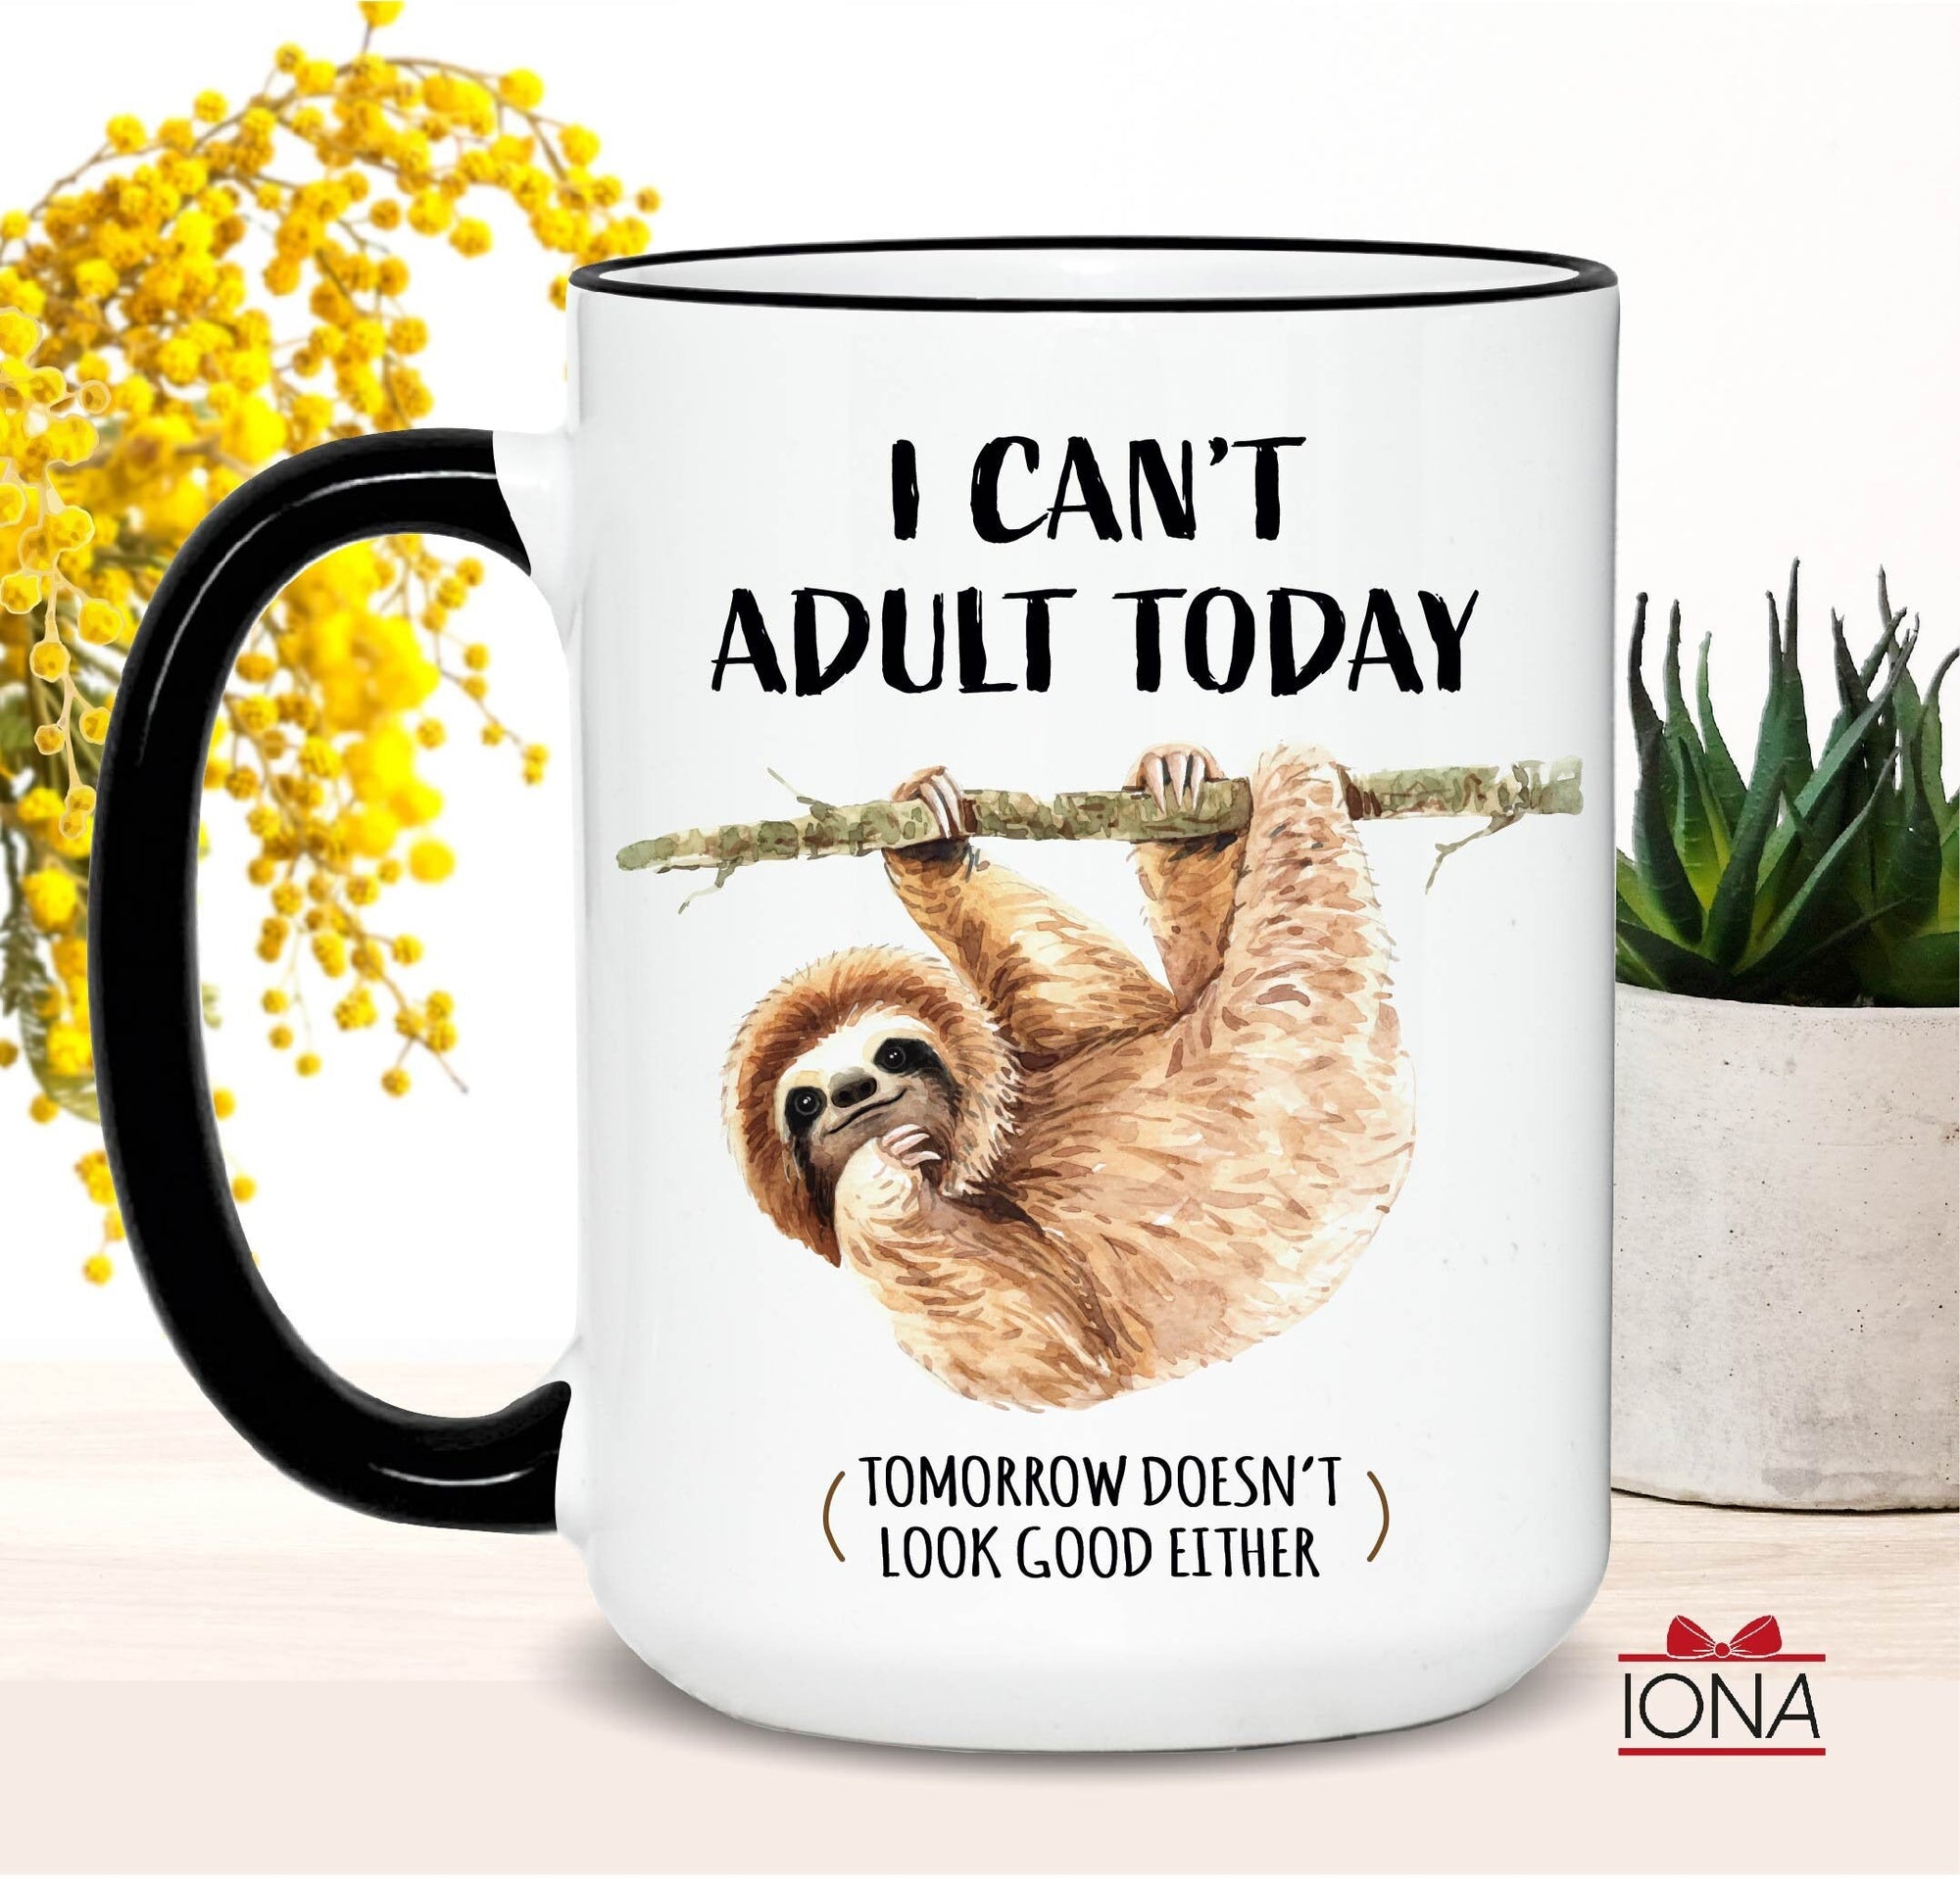 Sloth Mug - Funny Sloth Gifts - I can't Adult today Coffee Cup - Sloth Coffee Mug - Sloth Lover Gift - Birthday Gift for Women - Funny Gift